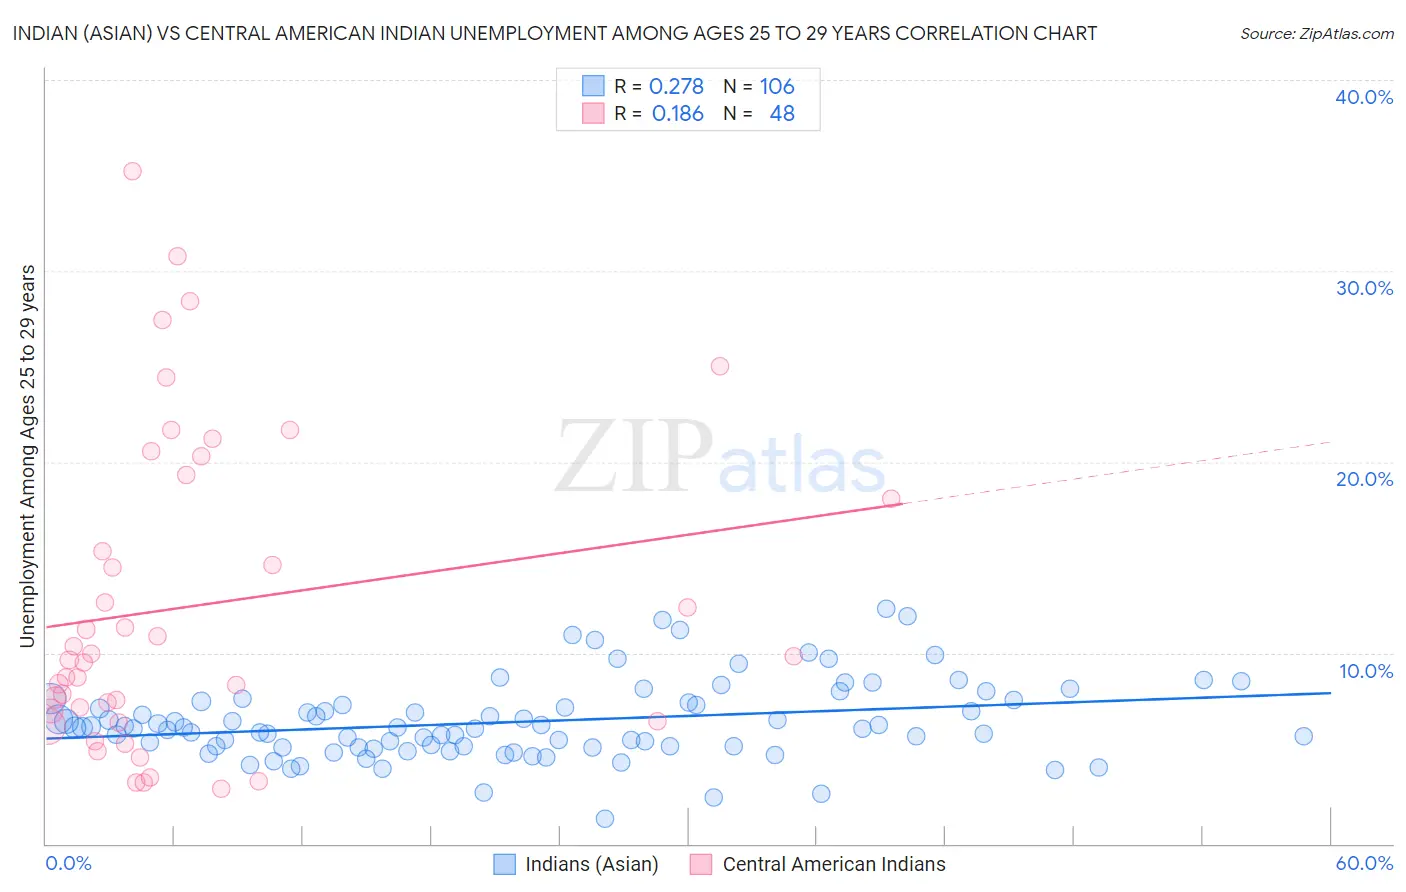 Indian (Asian) vs Central American Indian Unemployment Among Ages 25 to 29 years